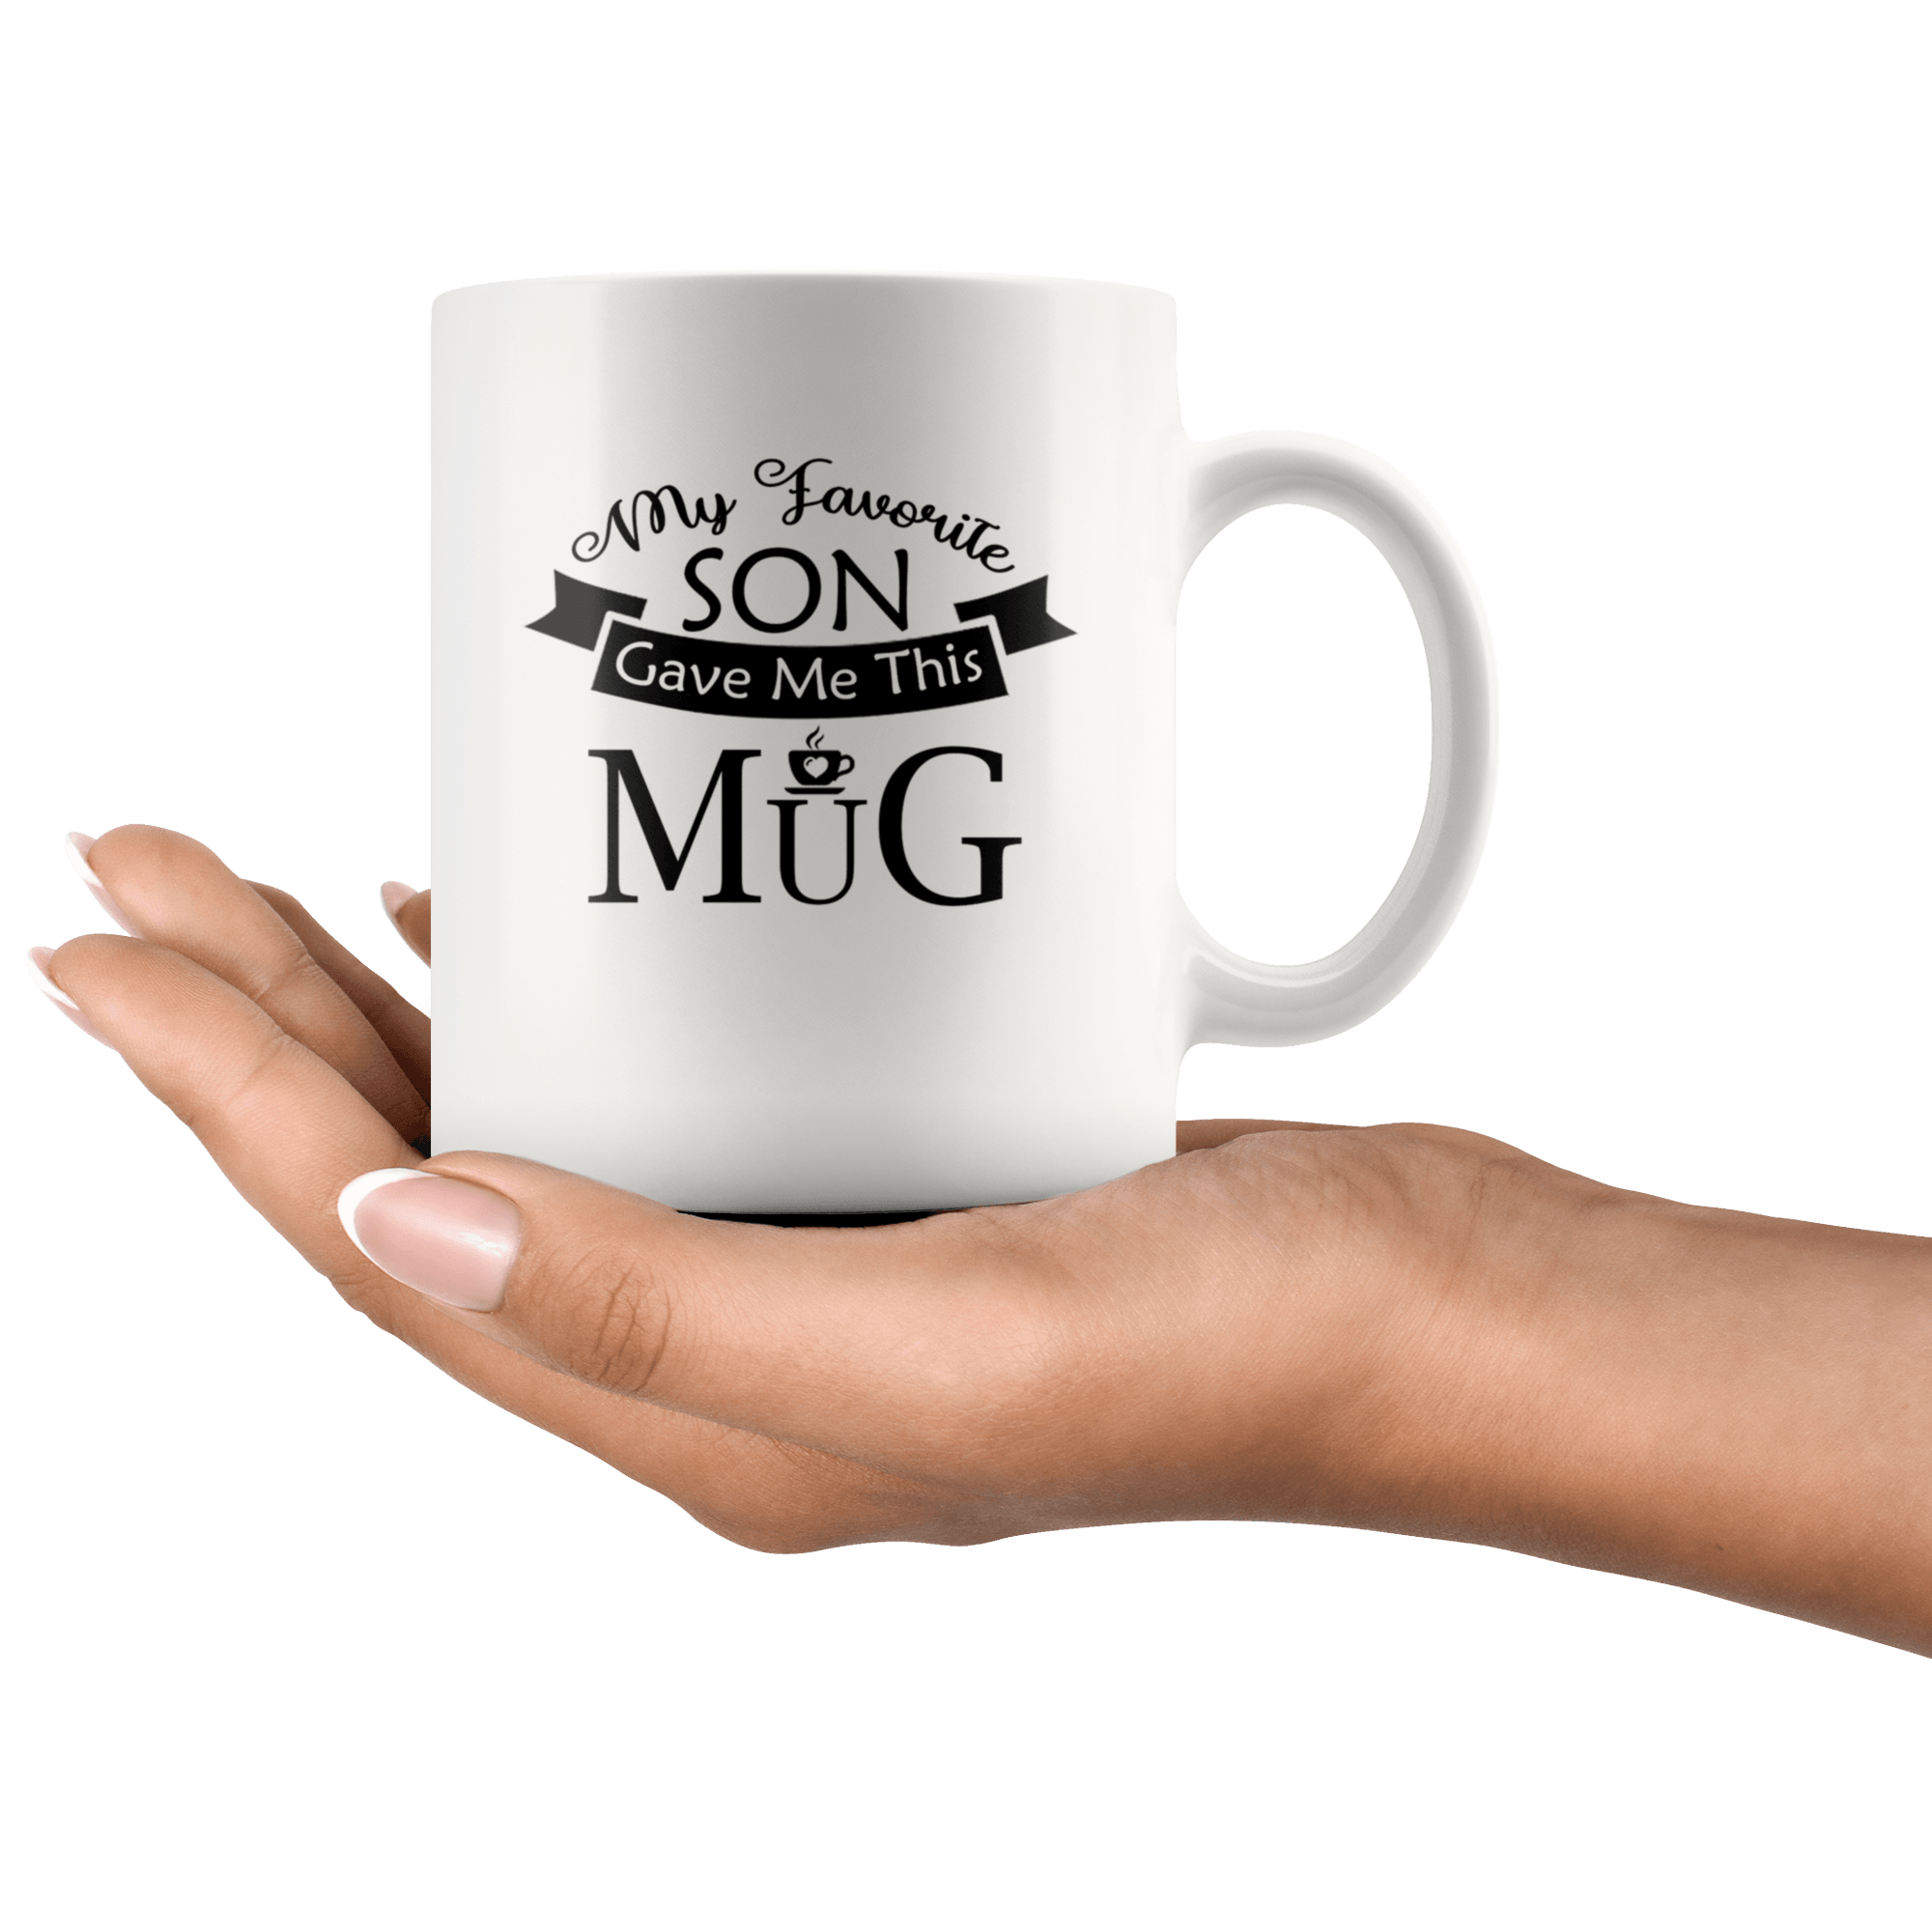 Great Coffee Mug For Father/Mother - My favorite Son Gave Me This Mug - SPCM